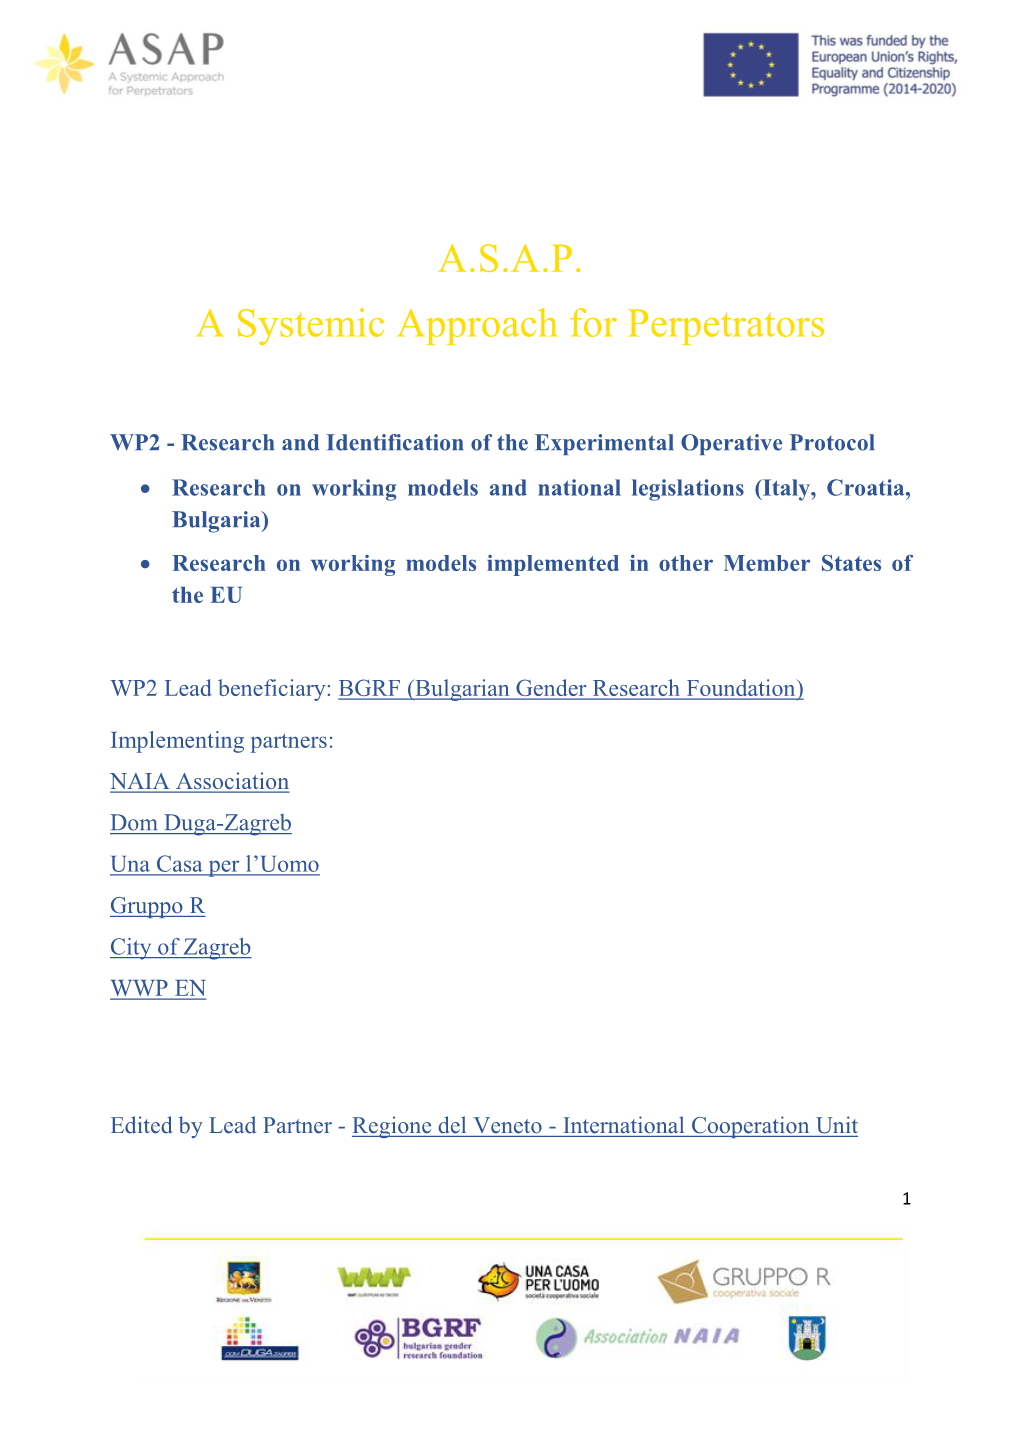 A.S.A.P. a Systemic Approach for Perpetrators